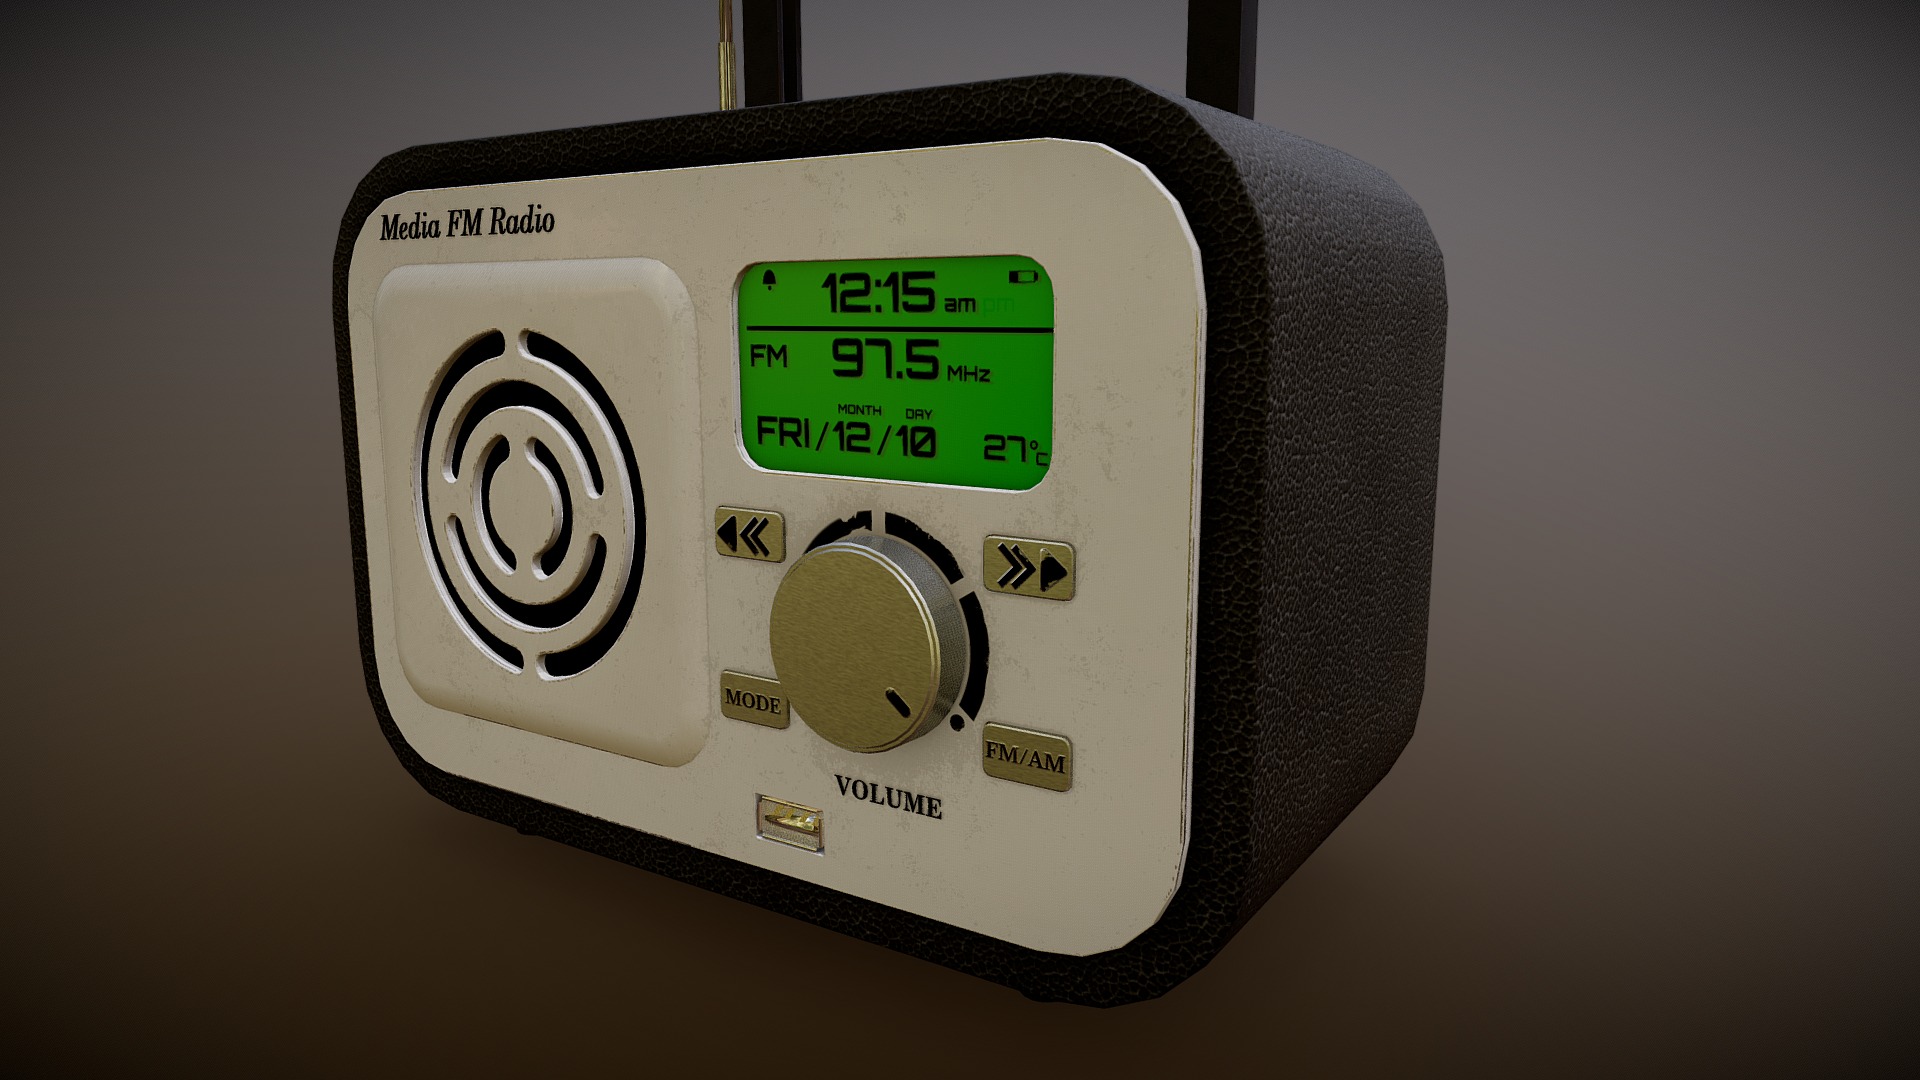 3D model Mini FM Radio v1.1 - This is a 3D model of the Mini FM Radio v1.1. The 3D model is about a white and green electronic device.